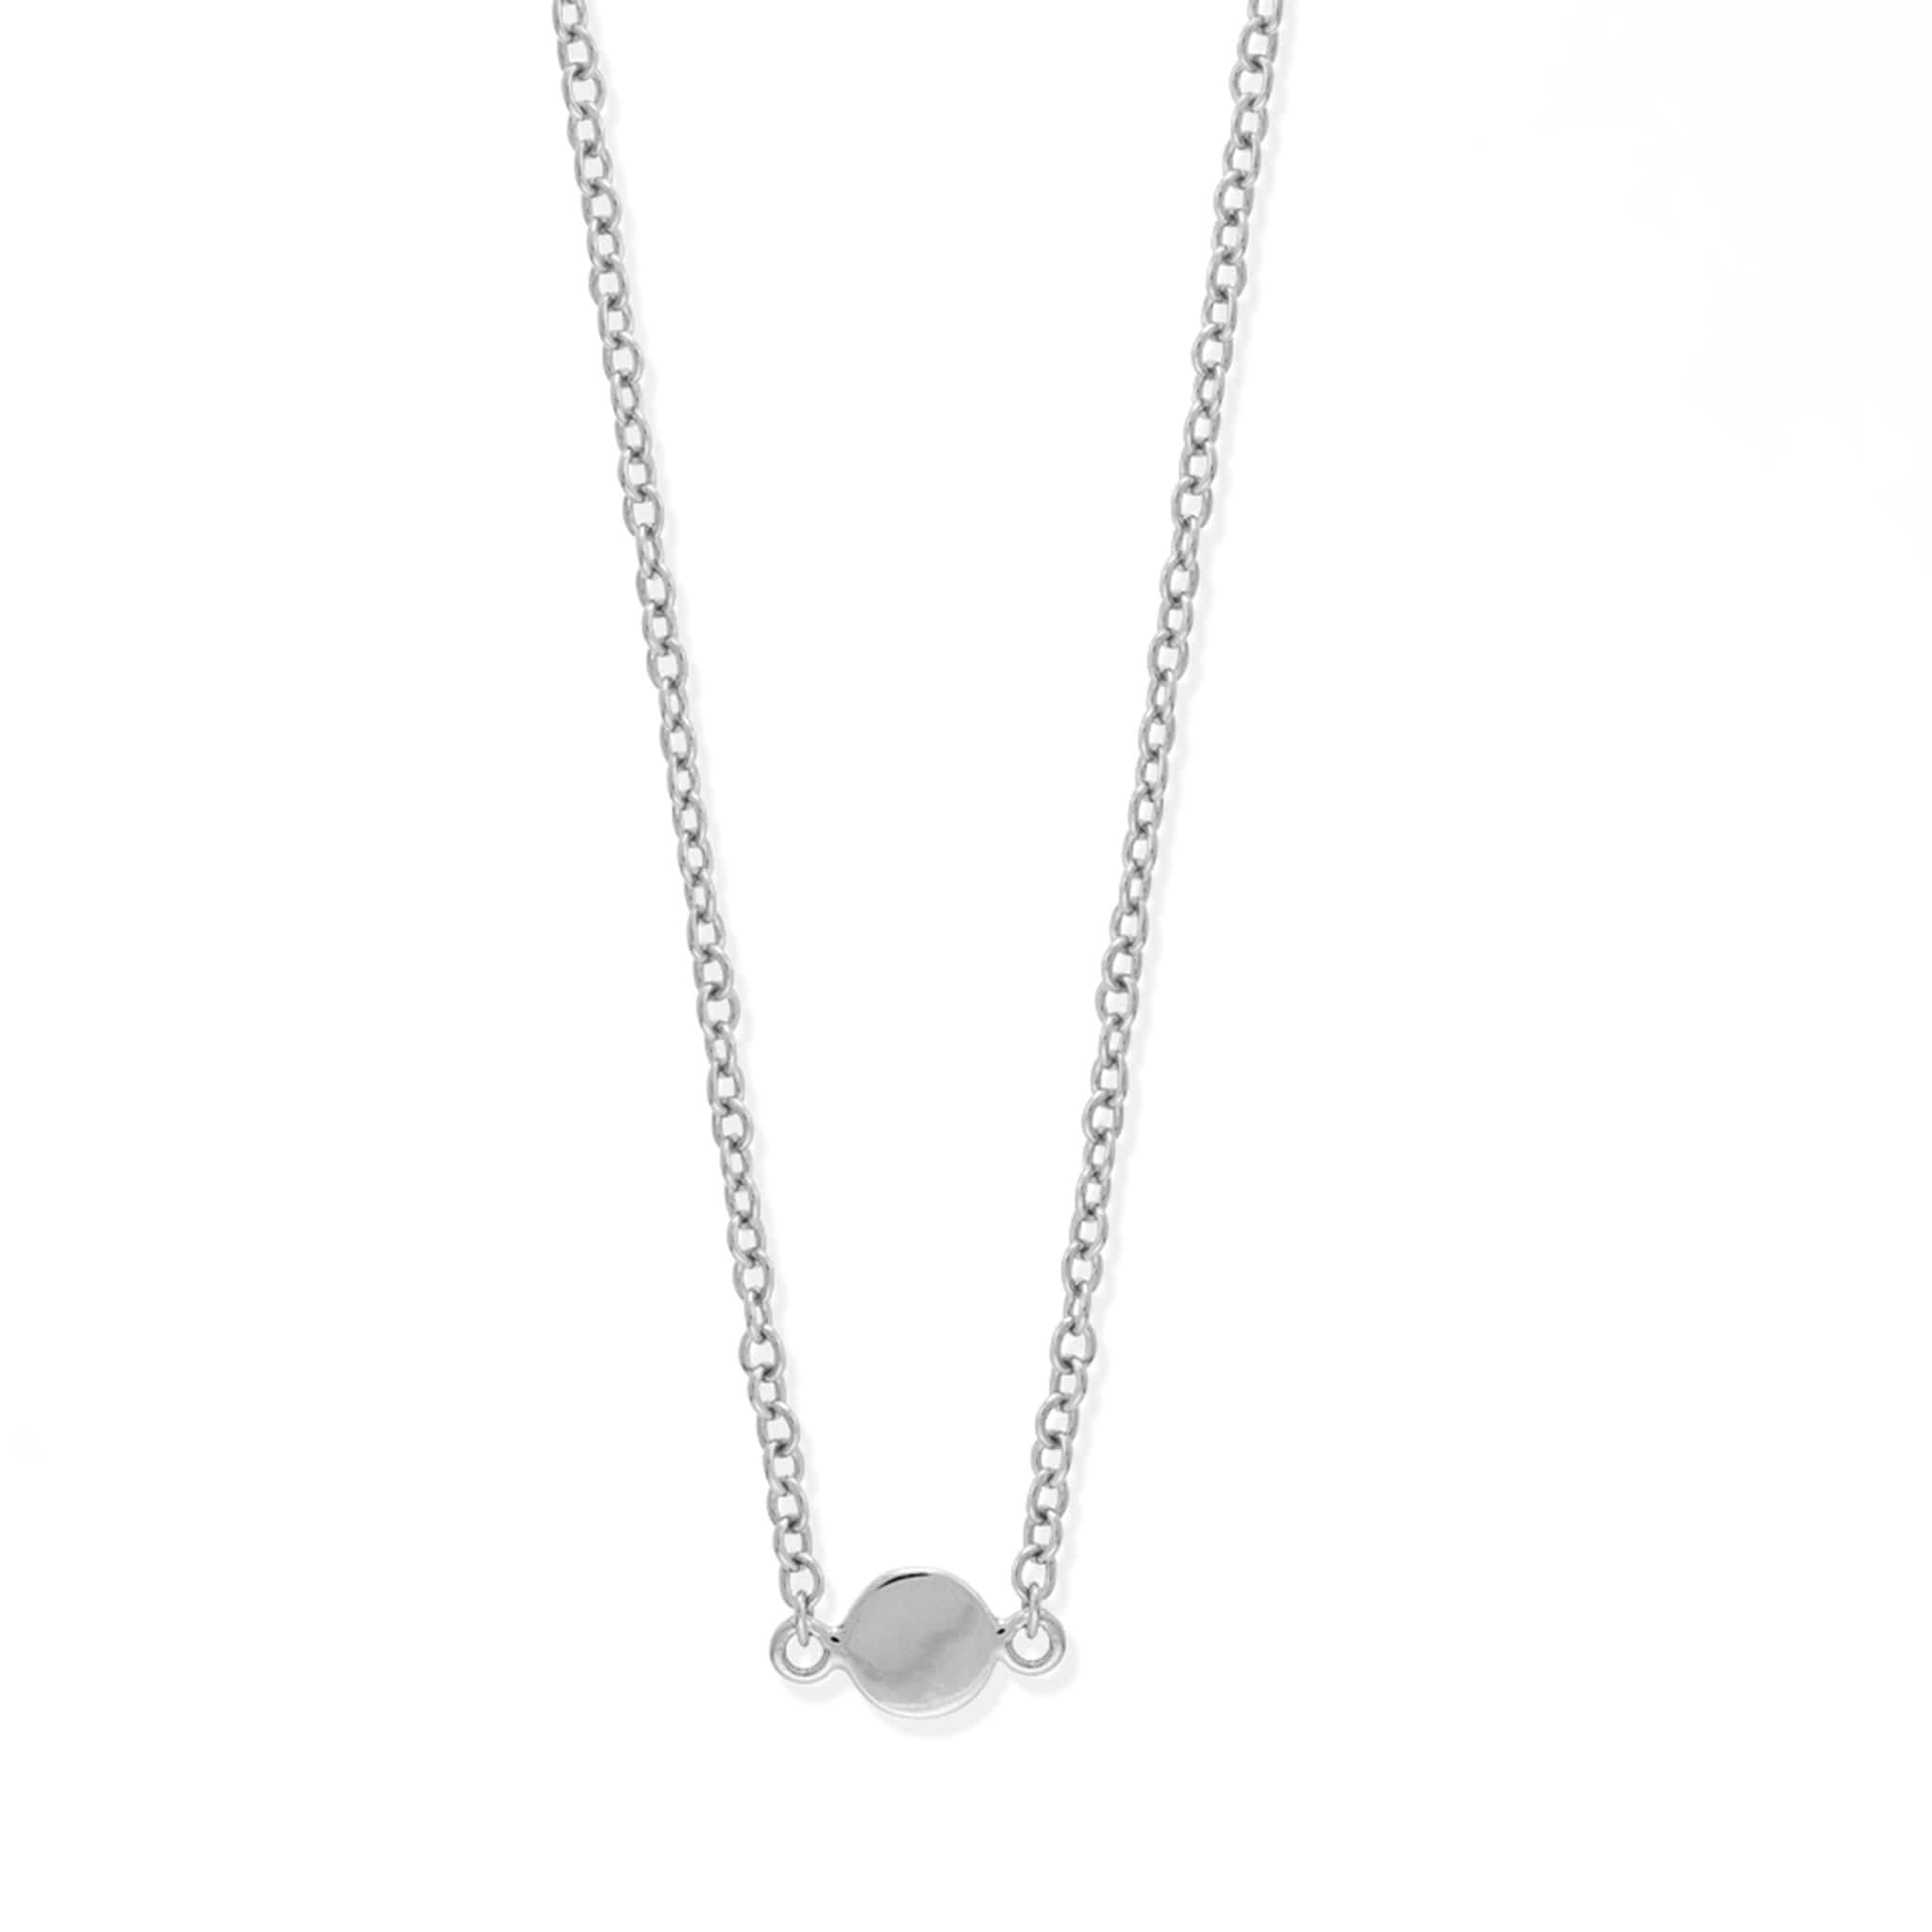 Boma Jewelry Necklaces Sterling Silver Belle Mini Dot Necklace